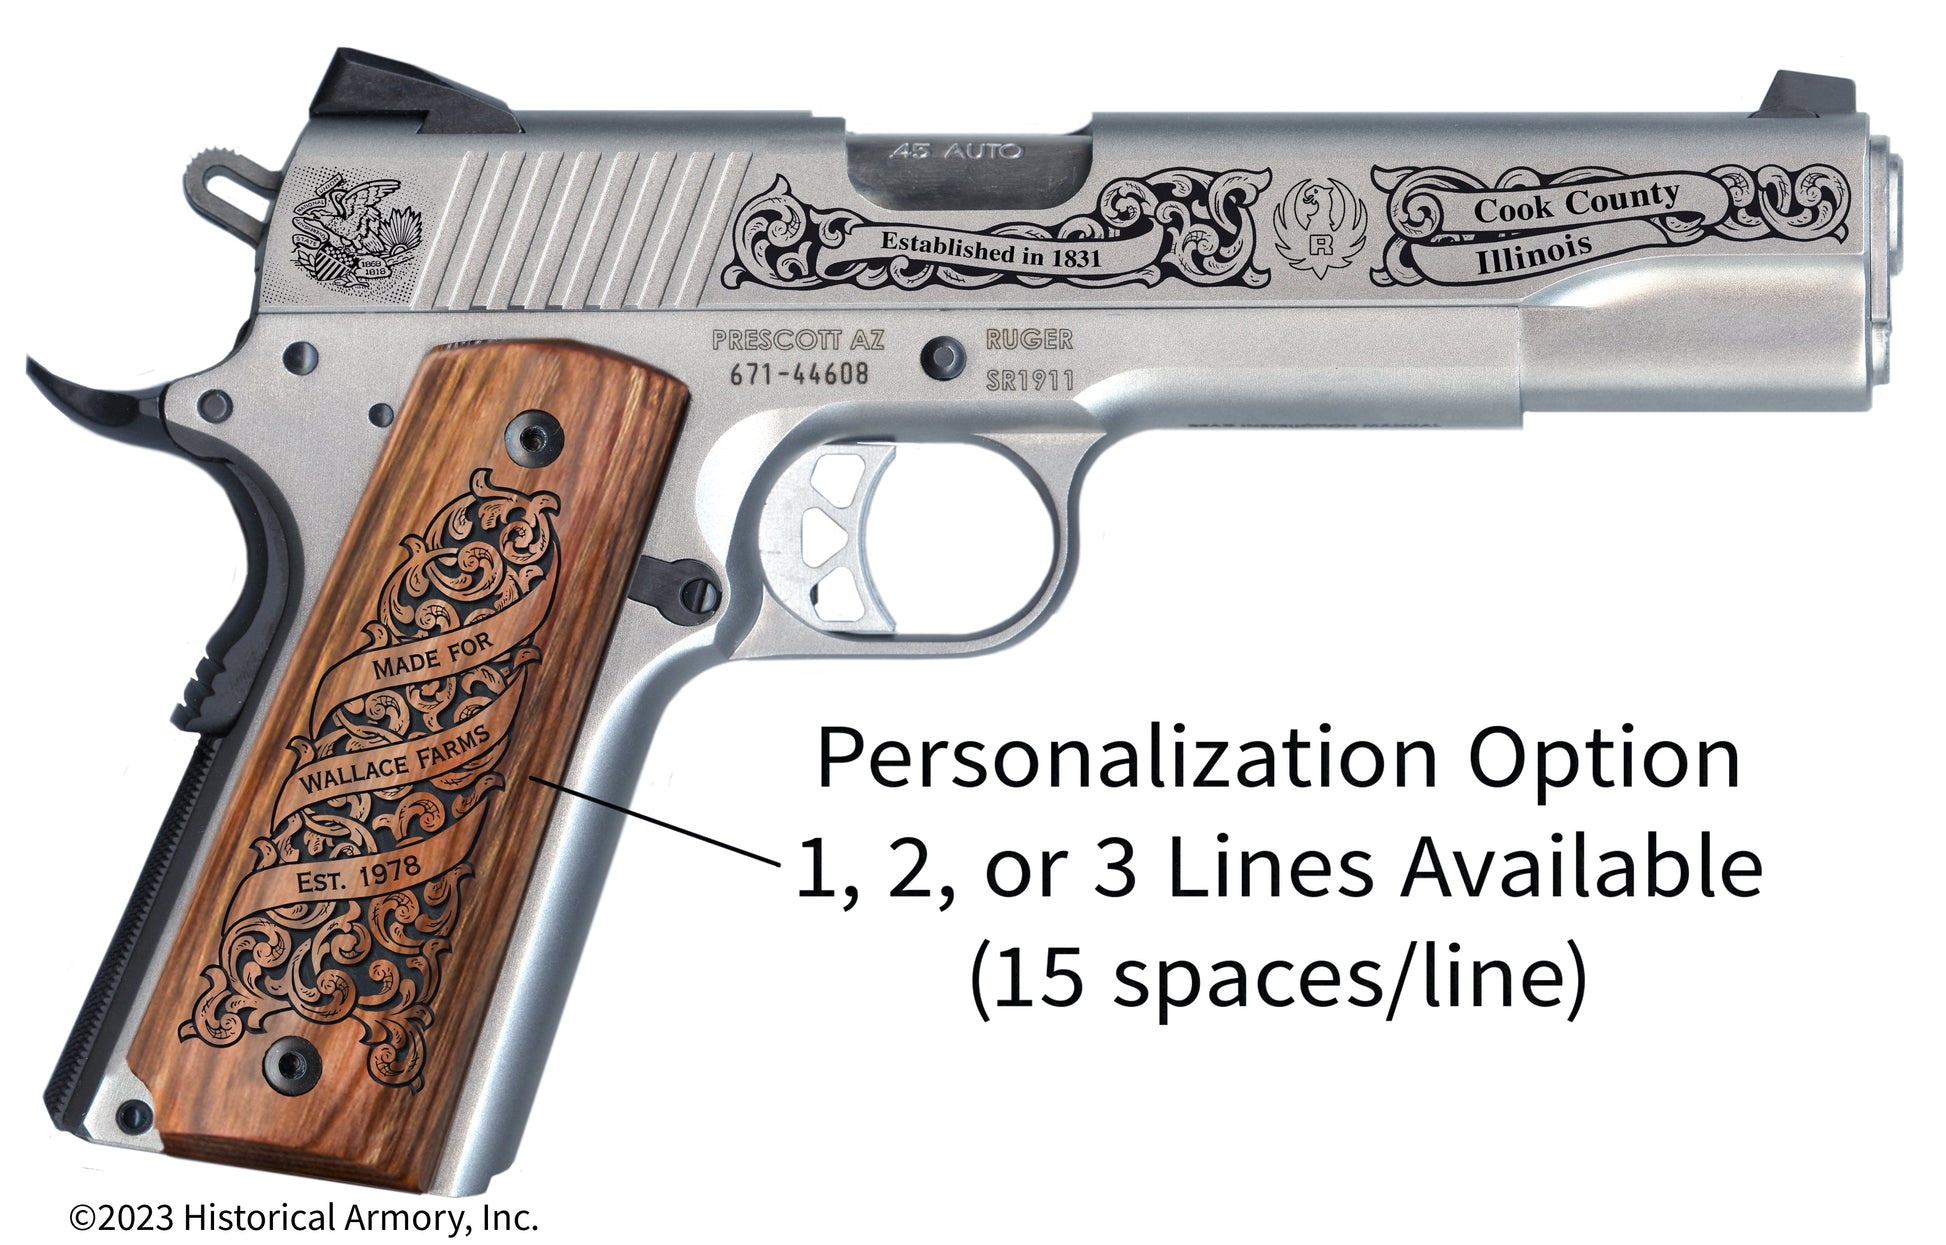 Cook County Illinois Personalized Engraved .45 Auto Ruger 1911